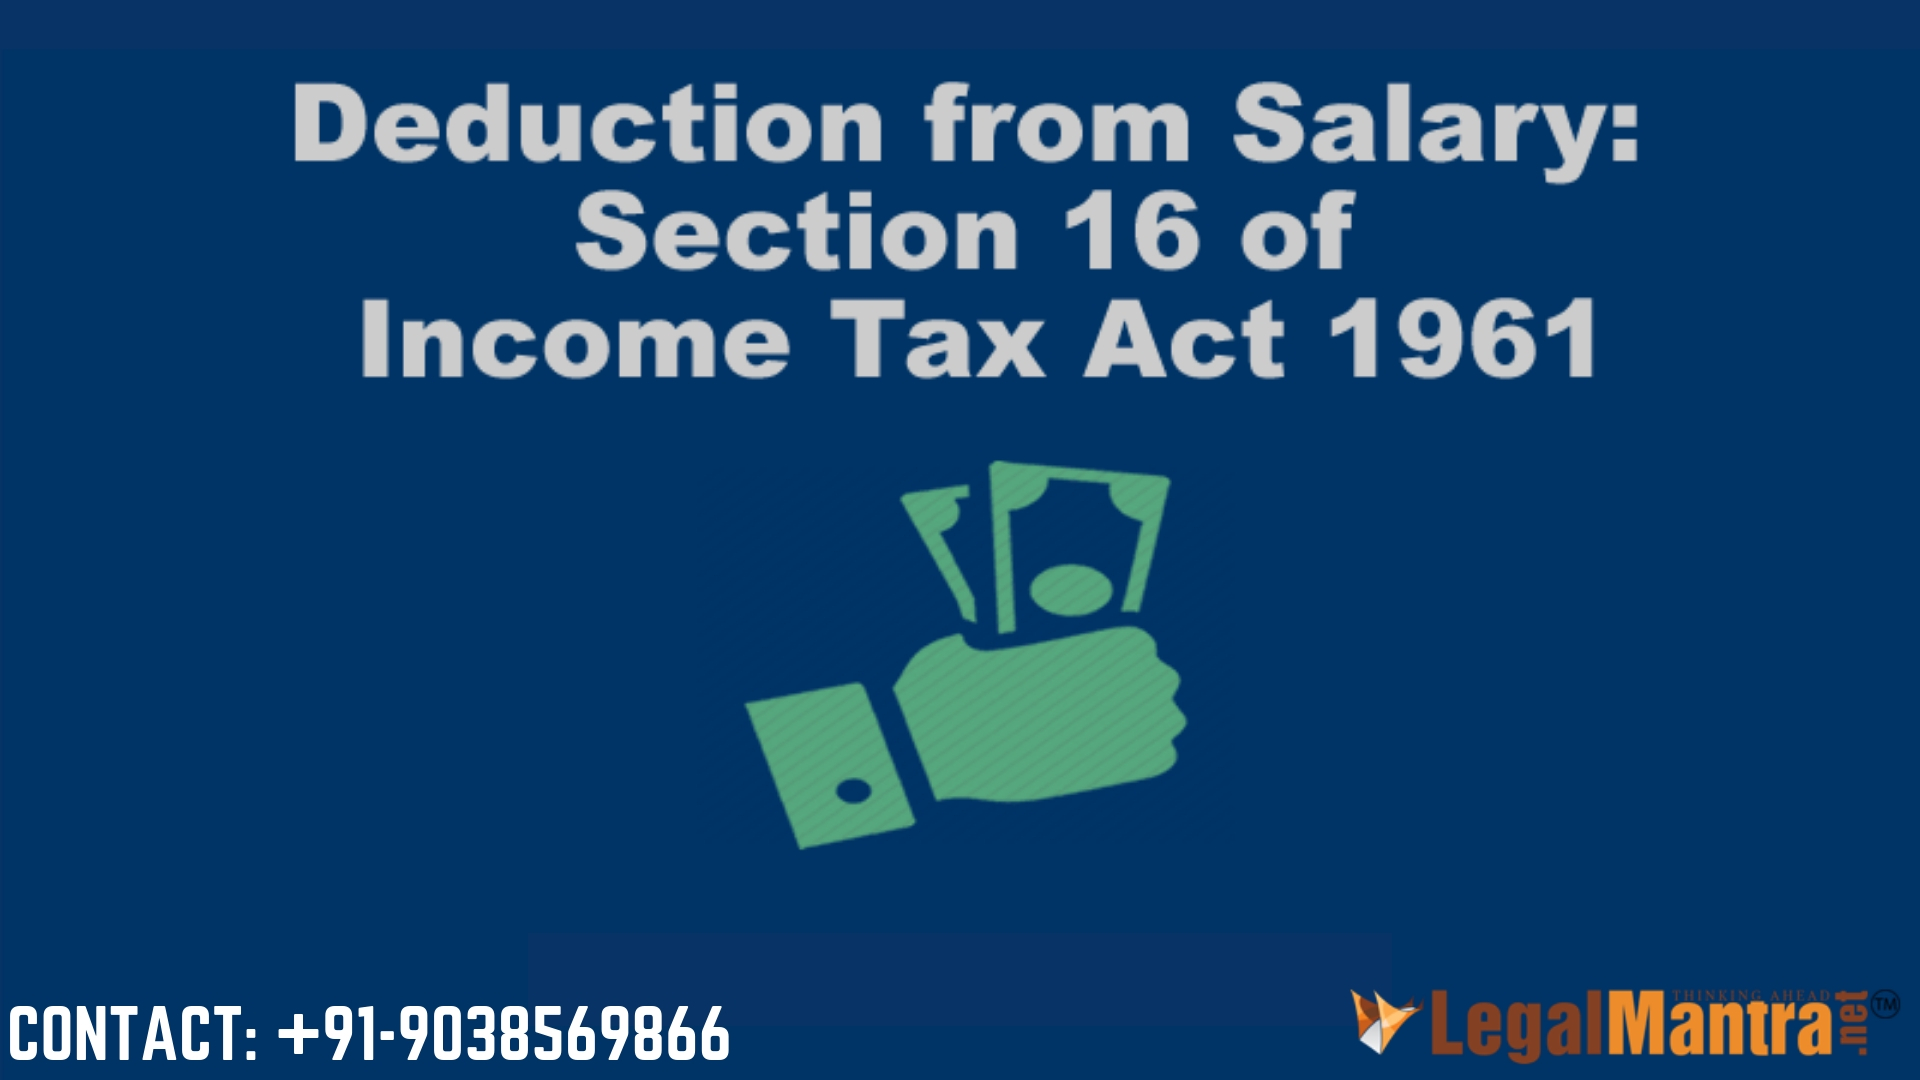 Standard Deduction on Salary Income of Section 16